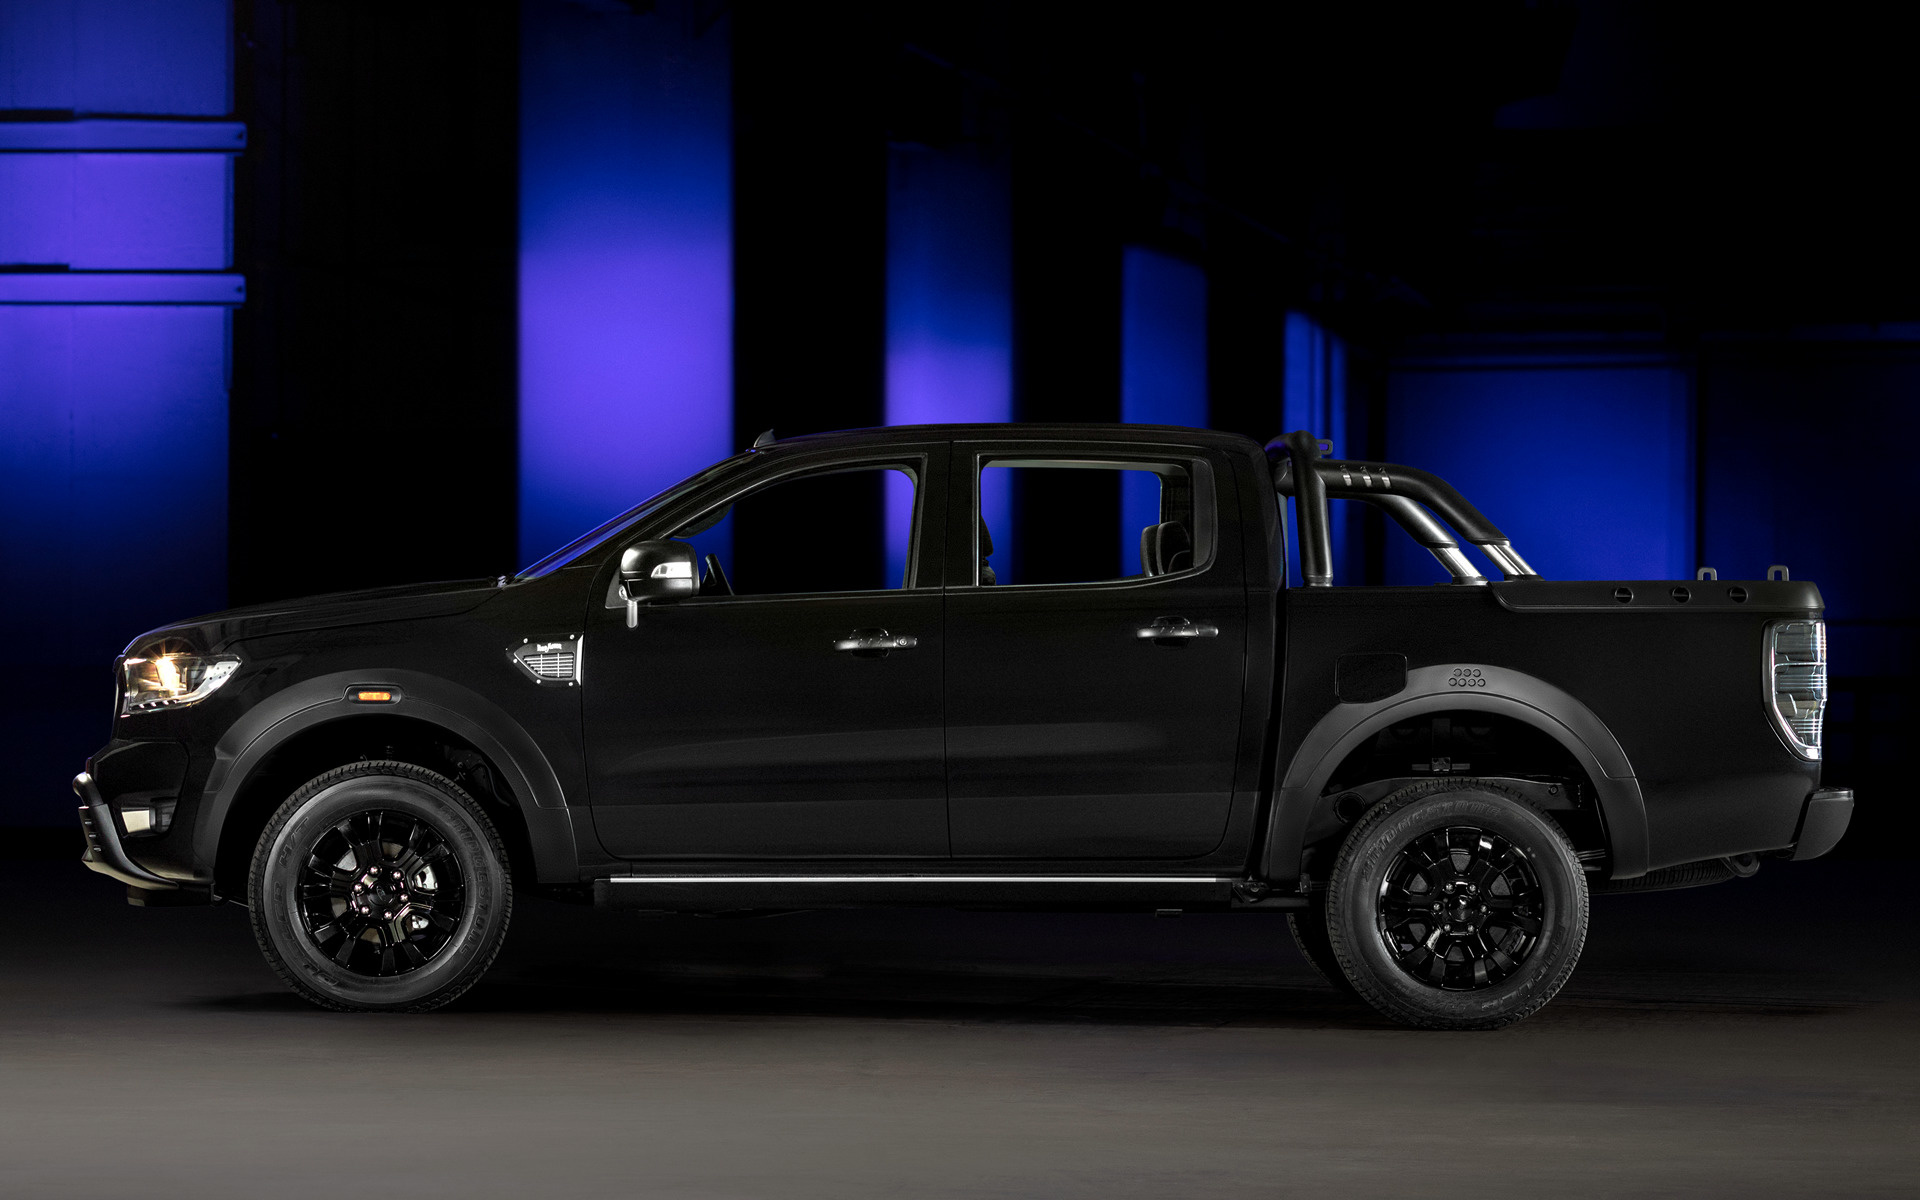 Ford Ranger Black Double Cab Wallpapers